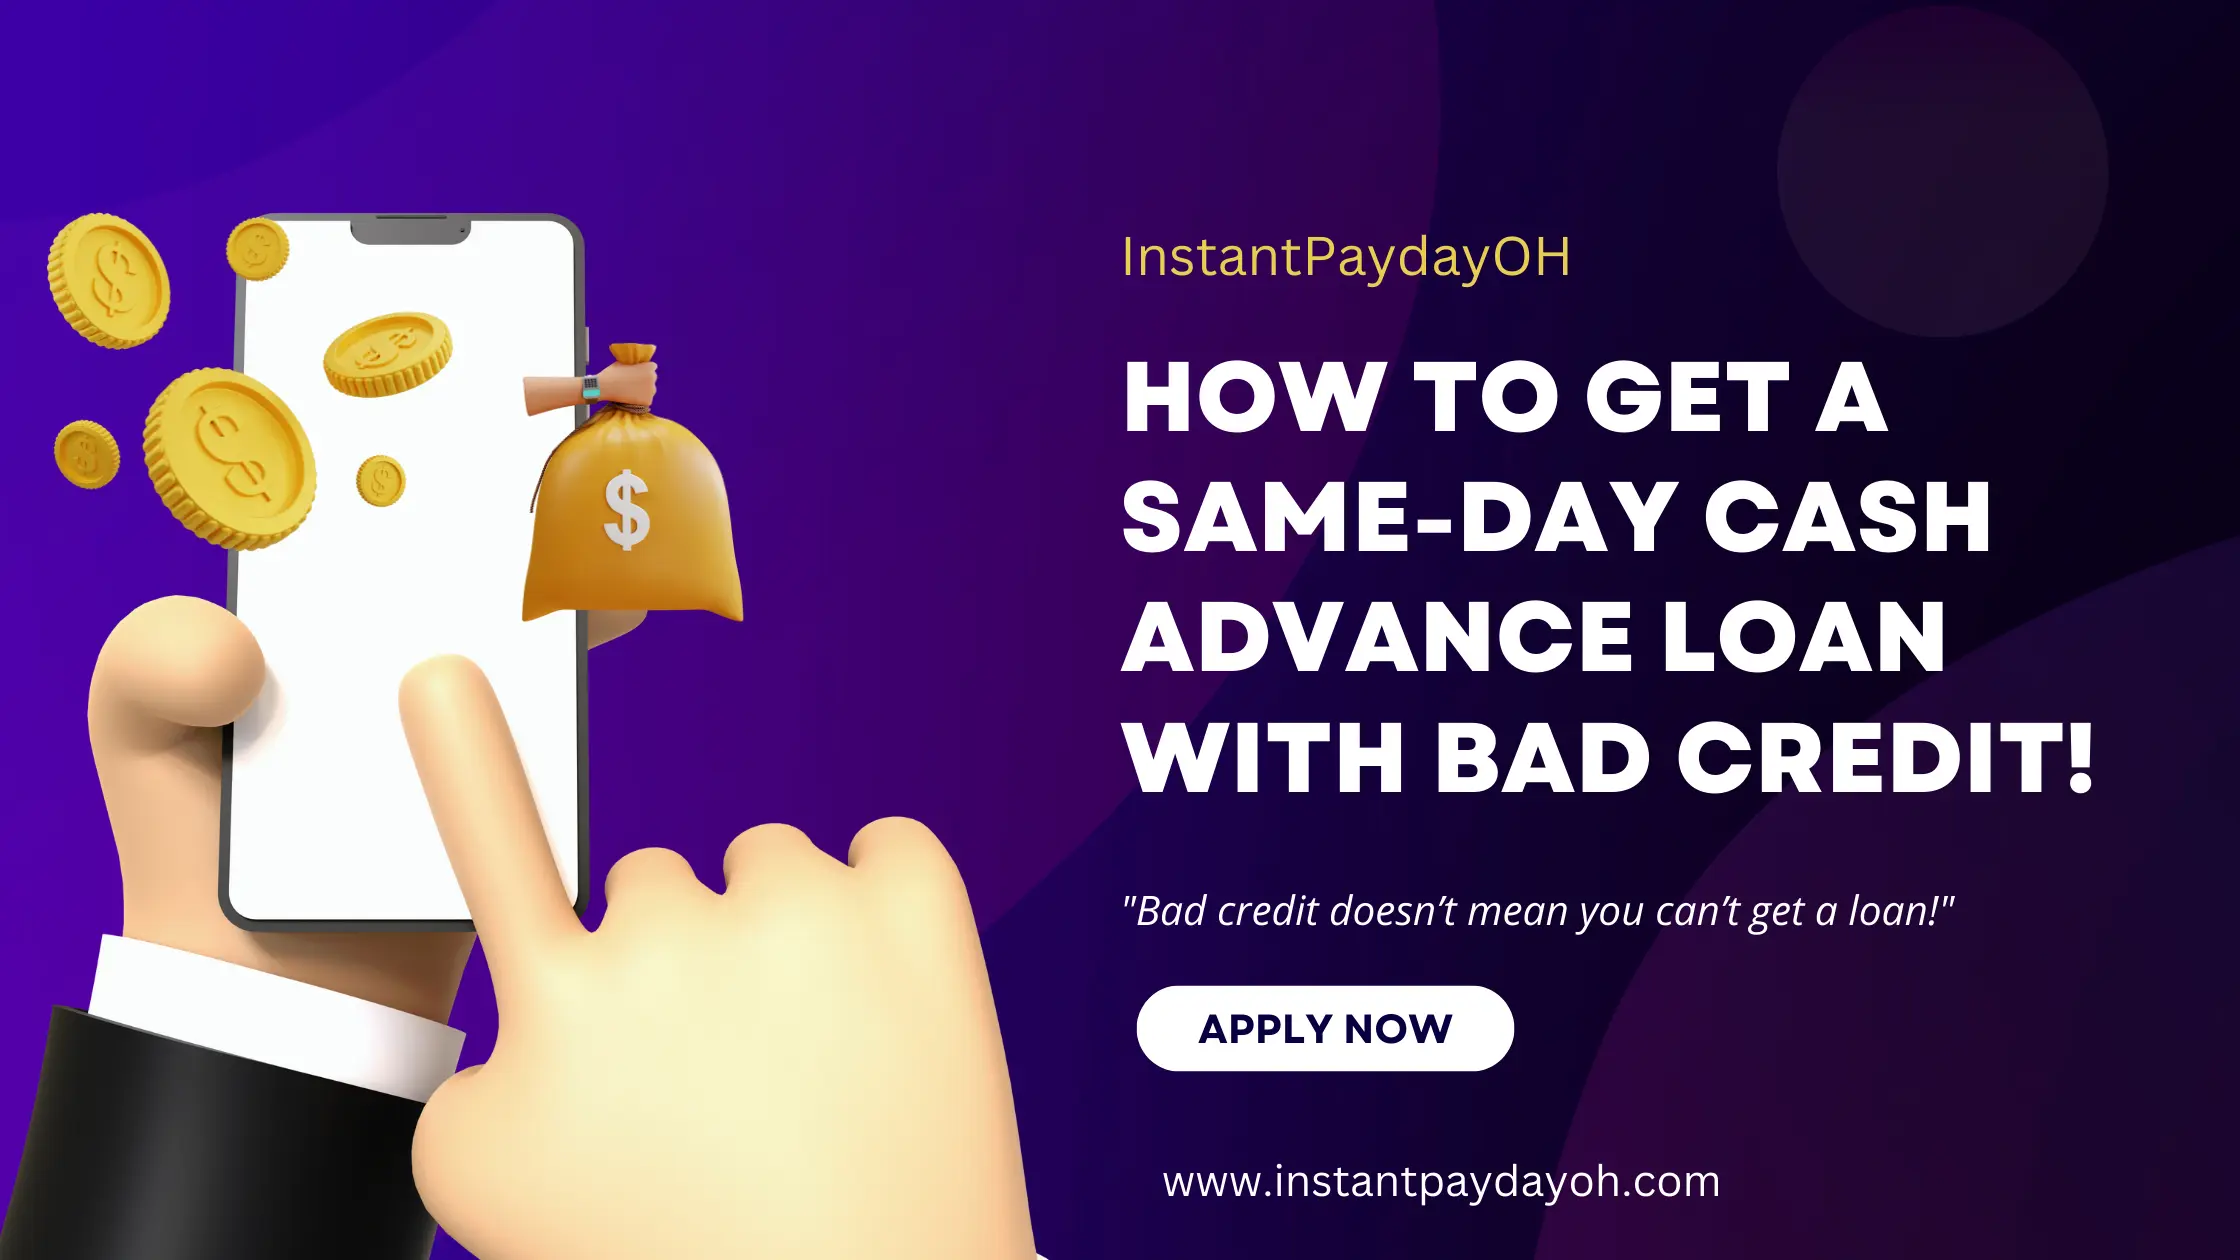 How to Get a Same-Day Cash Advance Loan with Bad Credit!